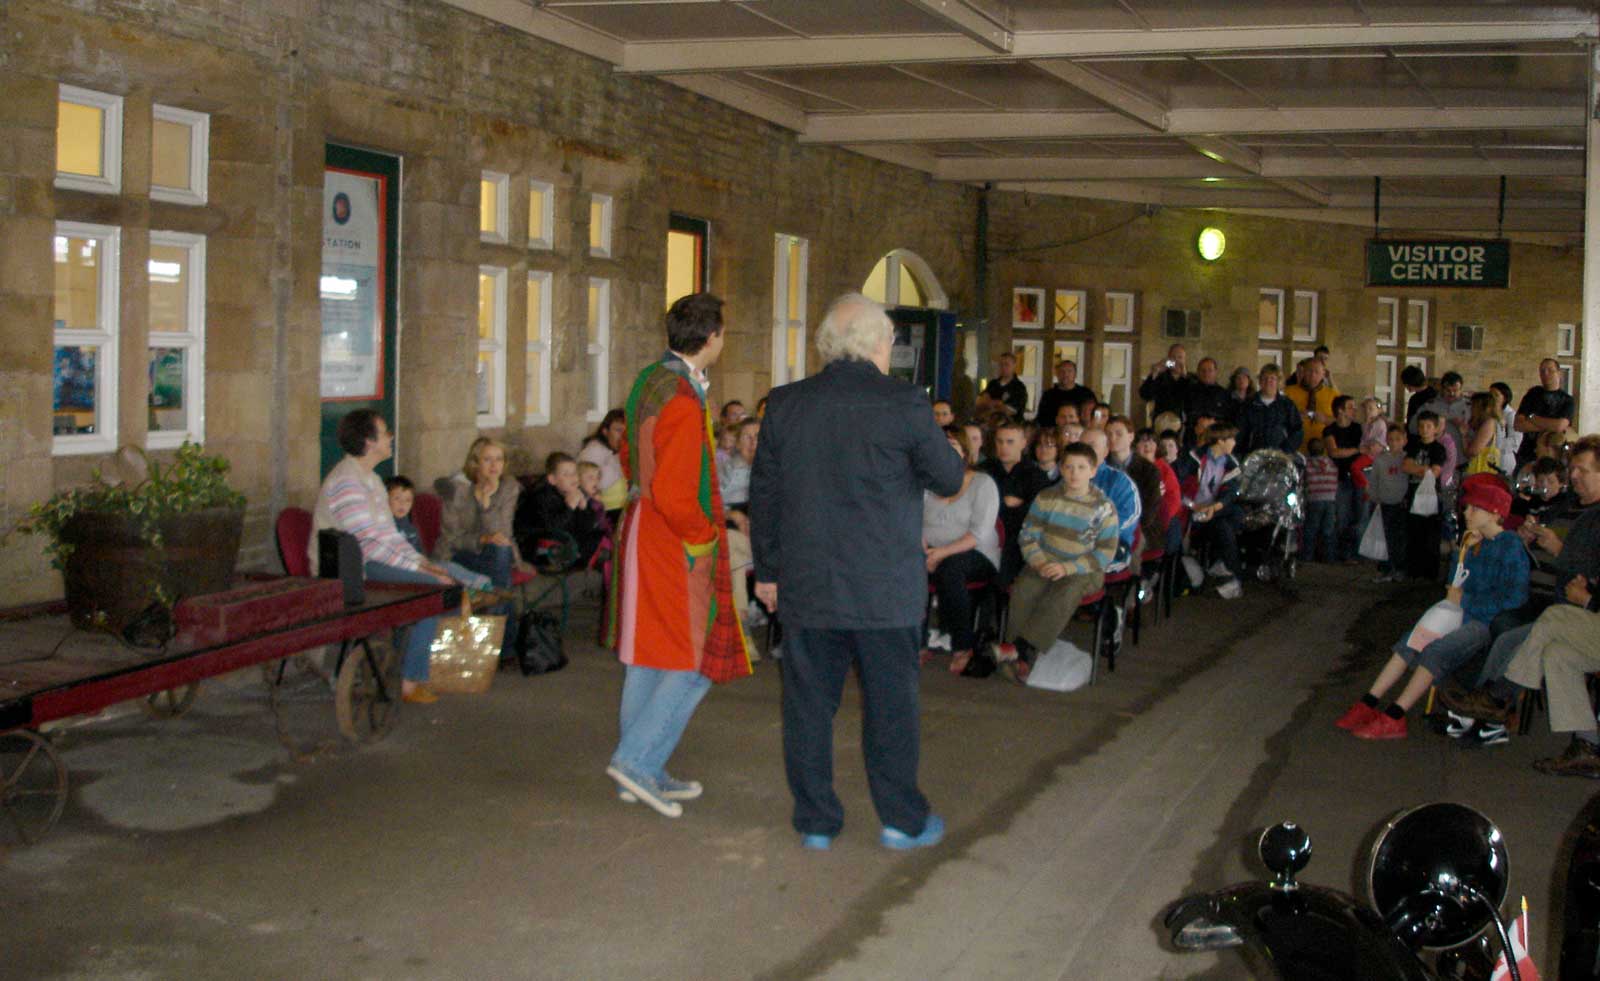 Colin regaling the audience, despite the occasional speeding train passing through the station